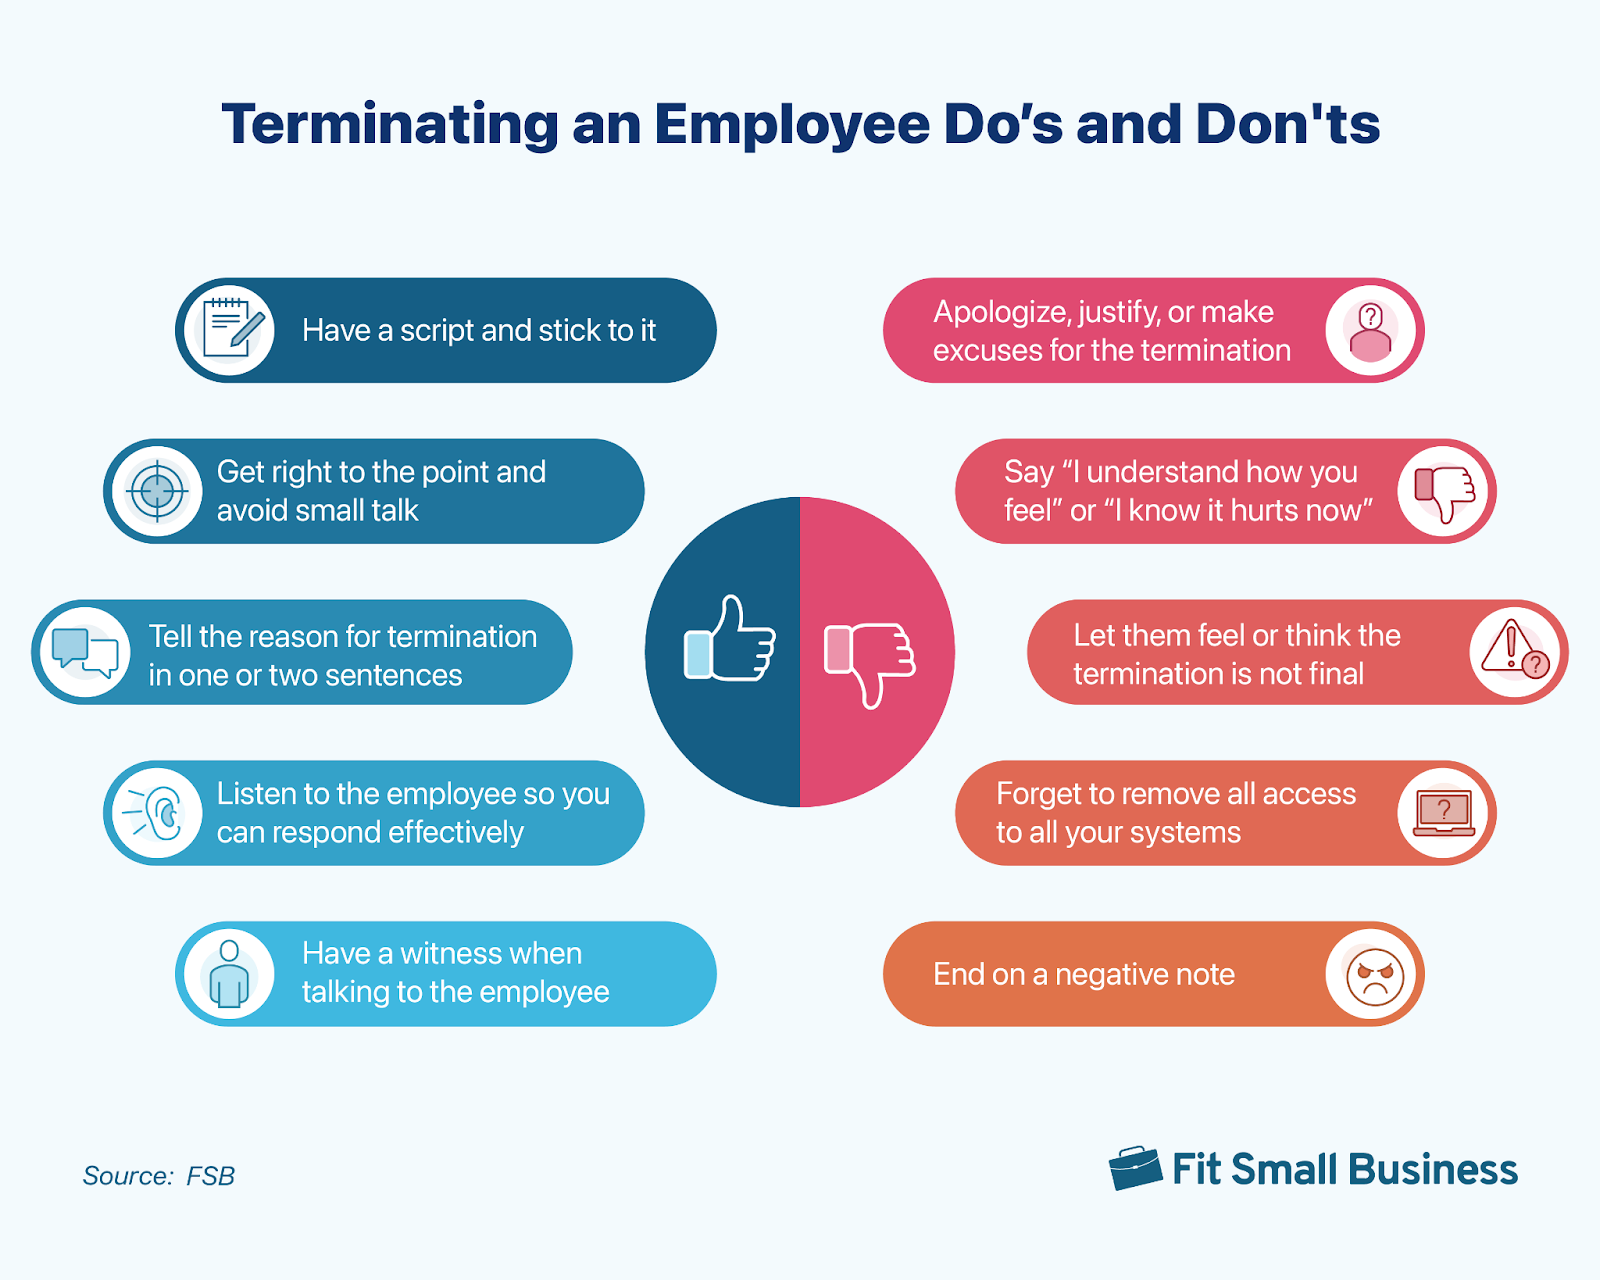 Terminating an Employee Do's and Dont's.